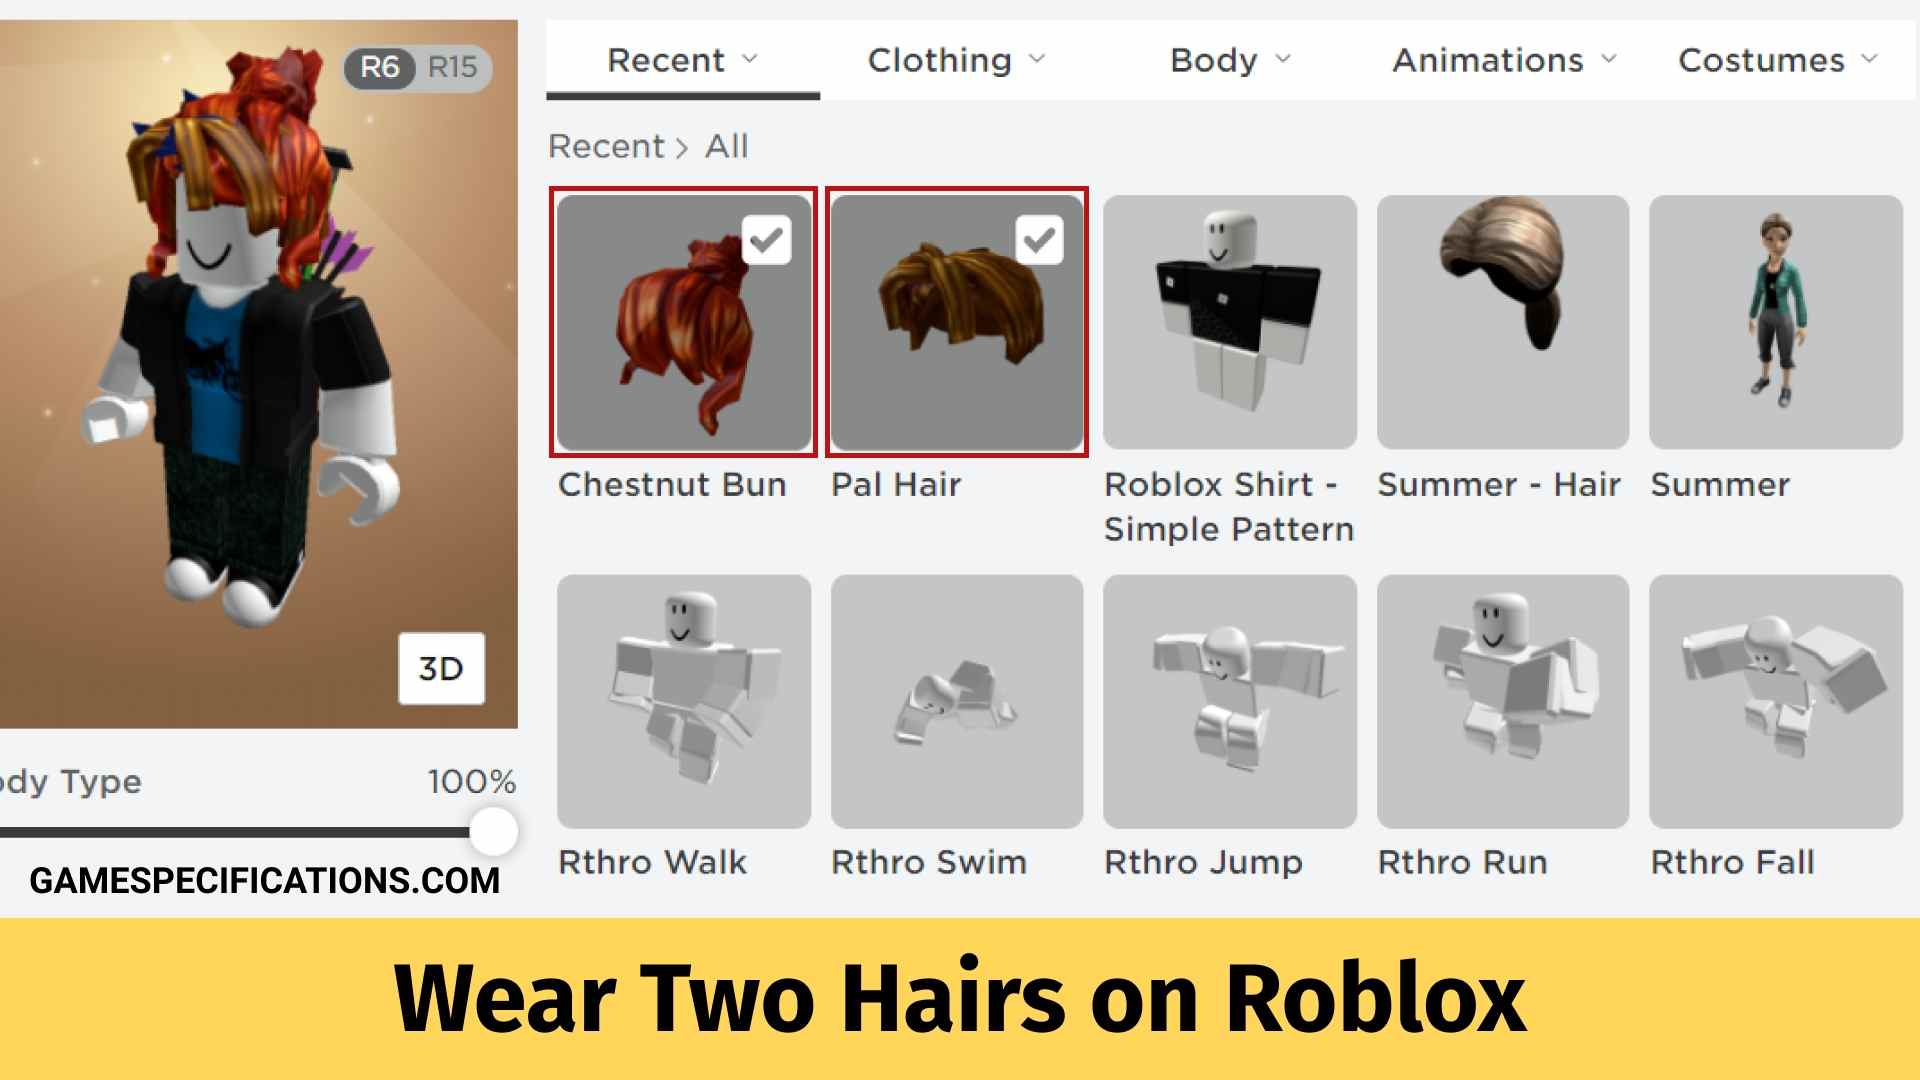 How To Wear Two Hairs On Roblox Game Specifications - how to put on multiple hairs on roblox mobile ipad